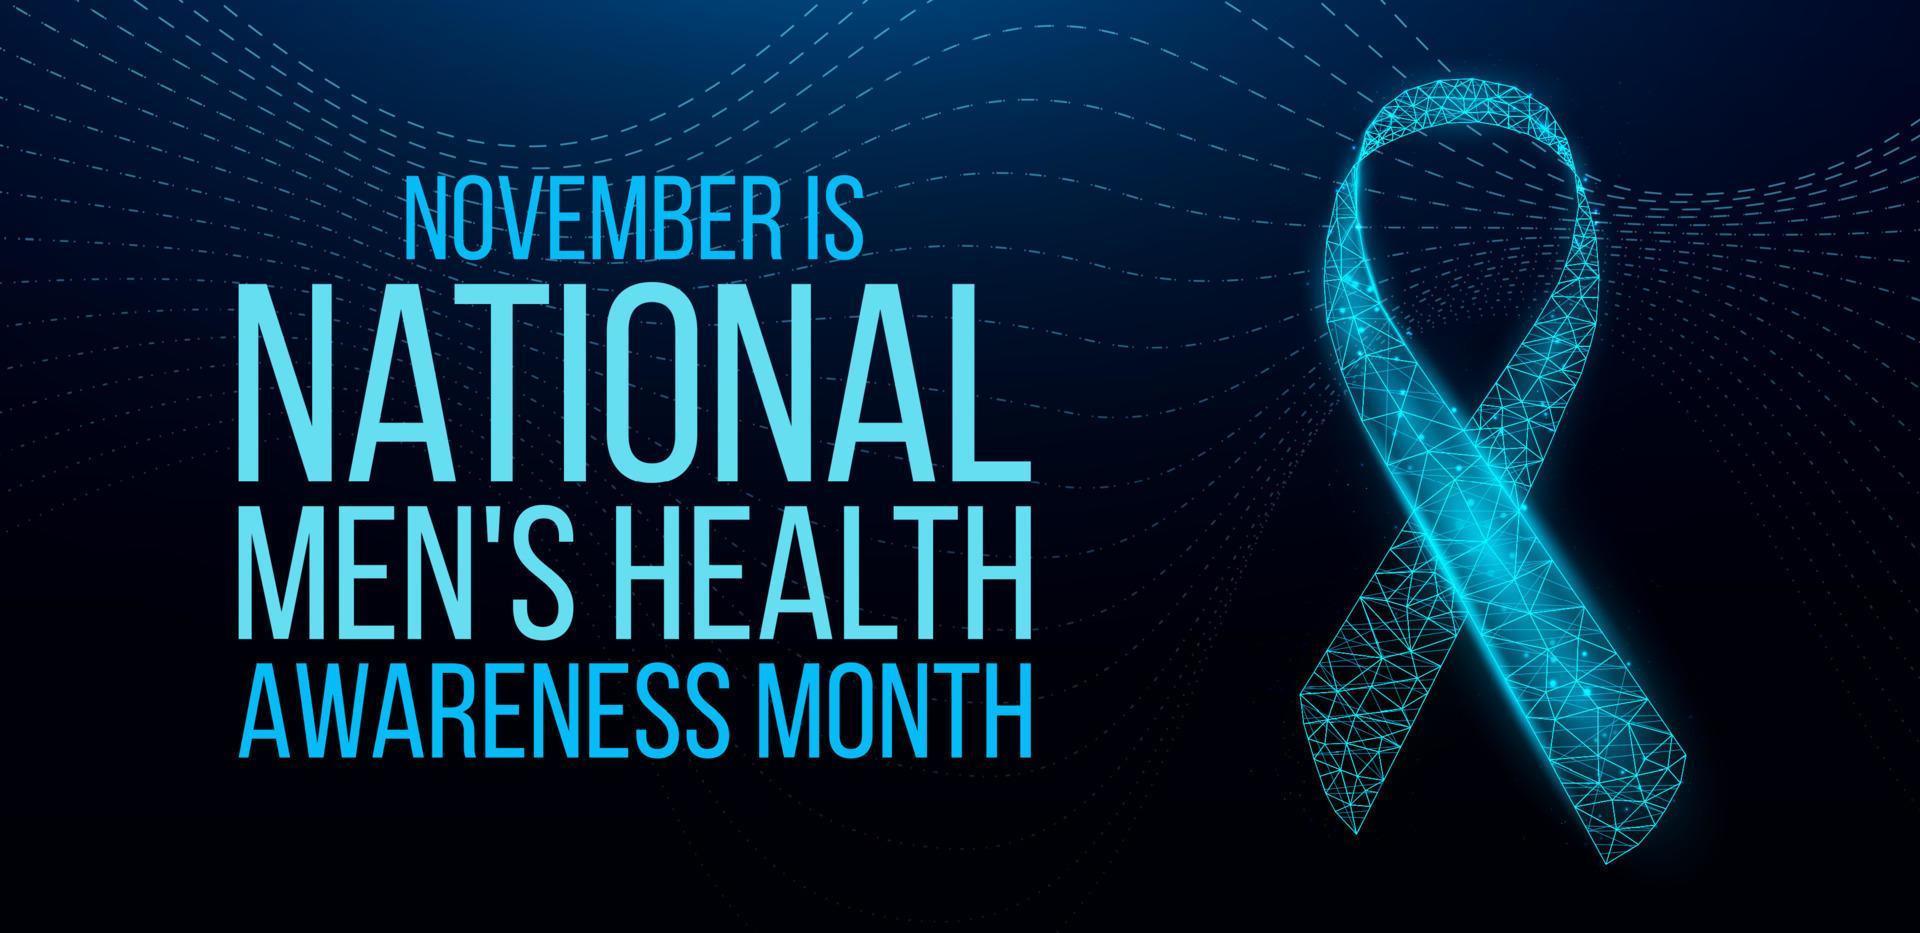 National Men's health awareness month concept. Banner template with blue ribbon awareness and text. Vector illustration.